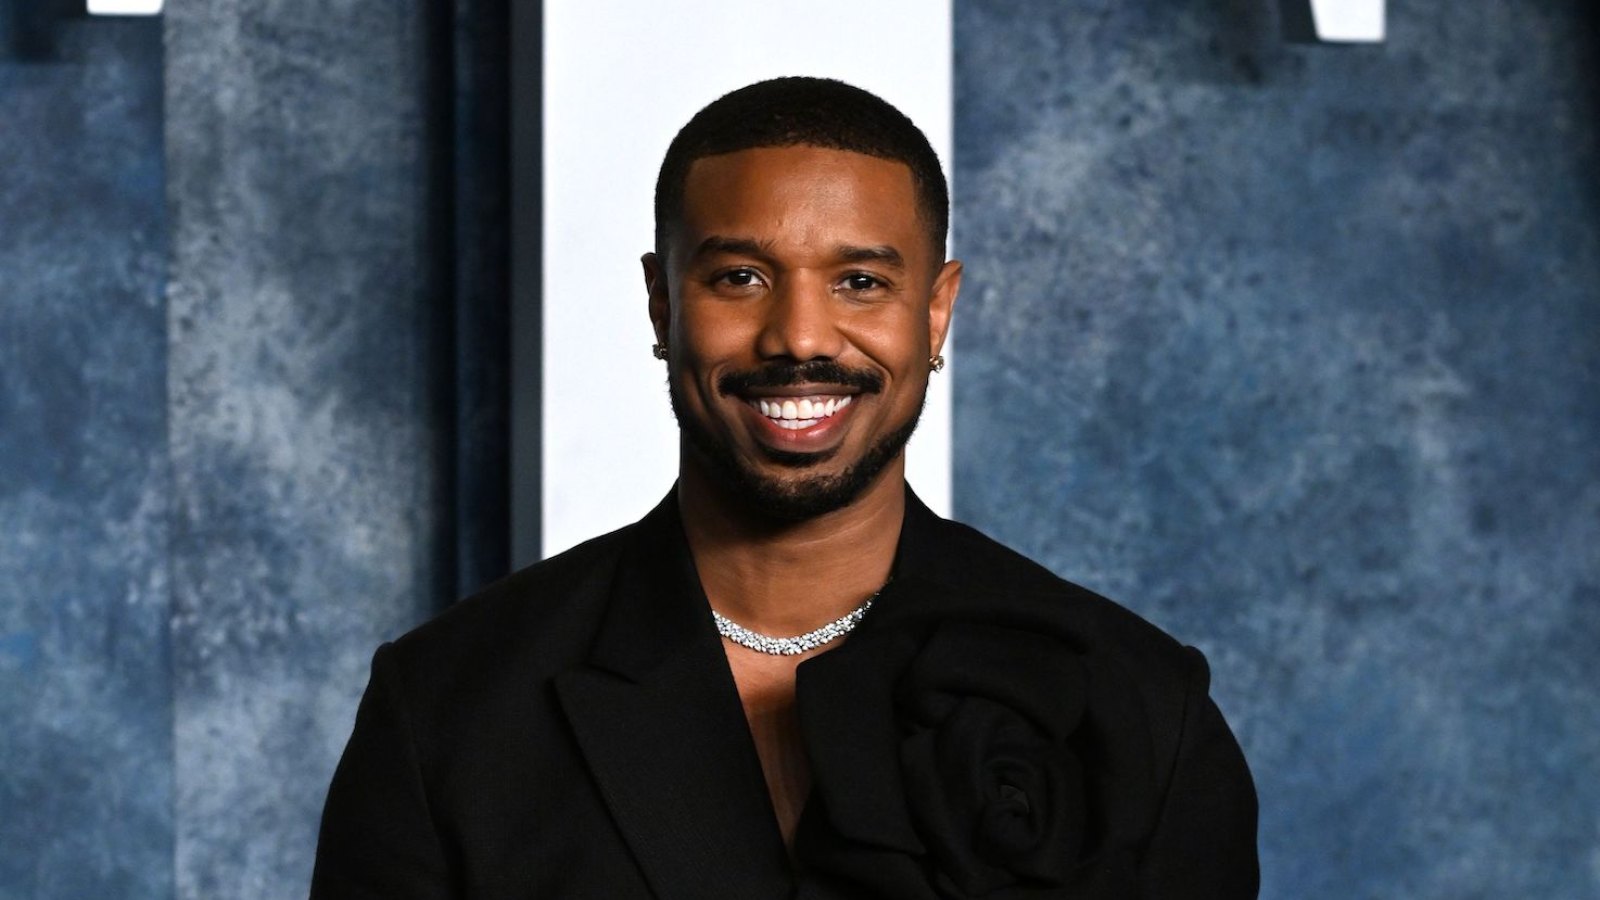 Michael B. Jordan wants this co-star to be Sexiest Man Alive